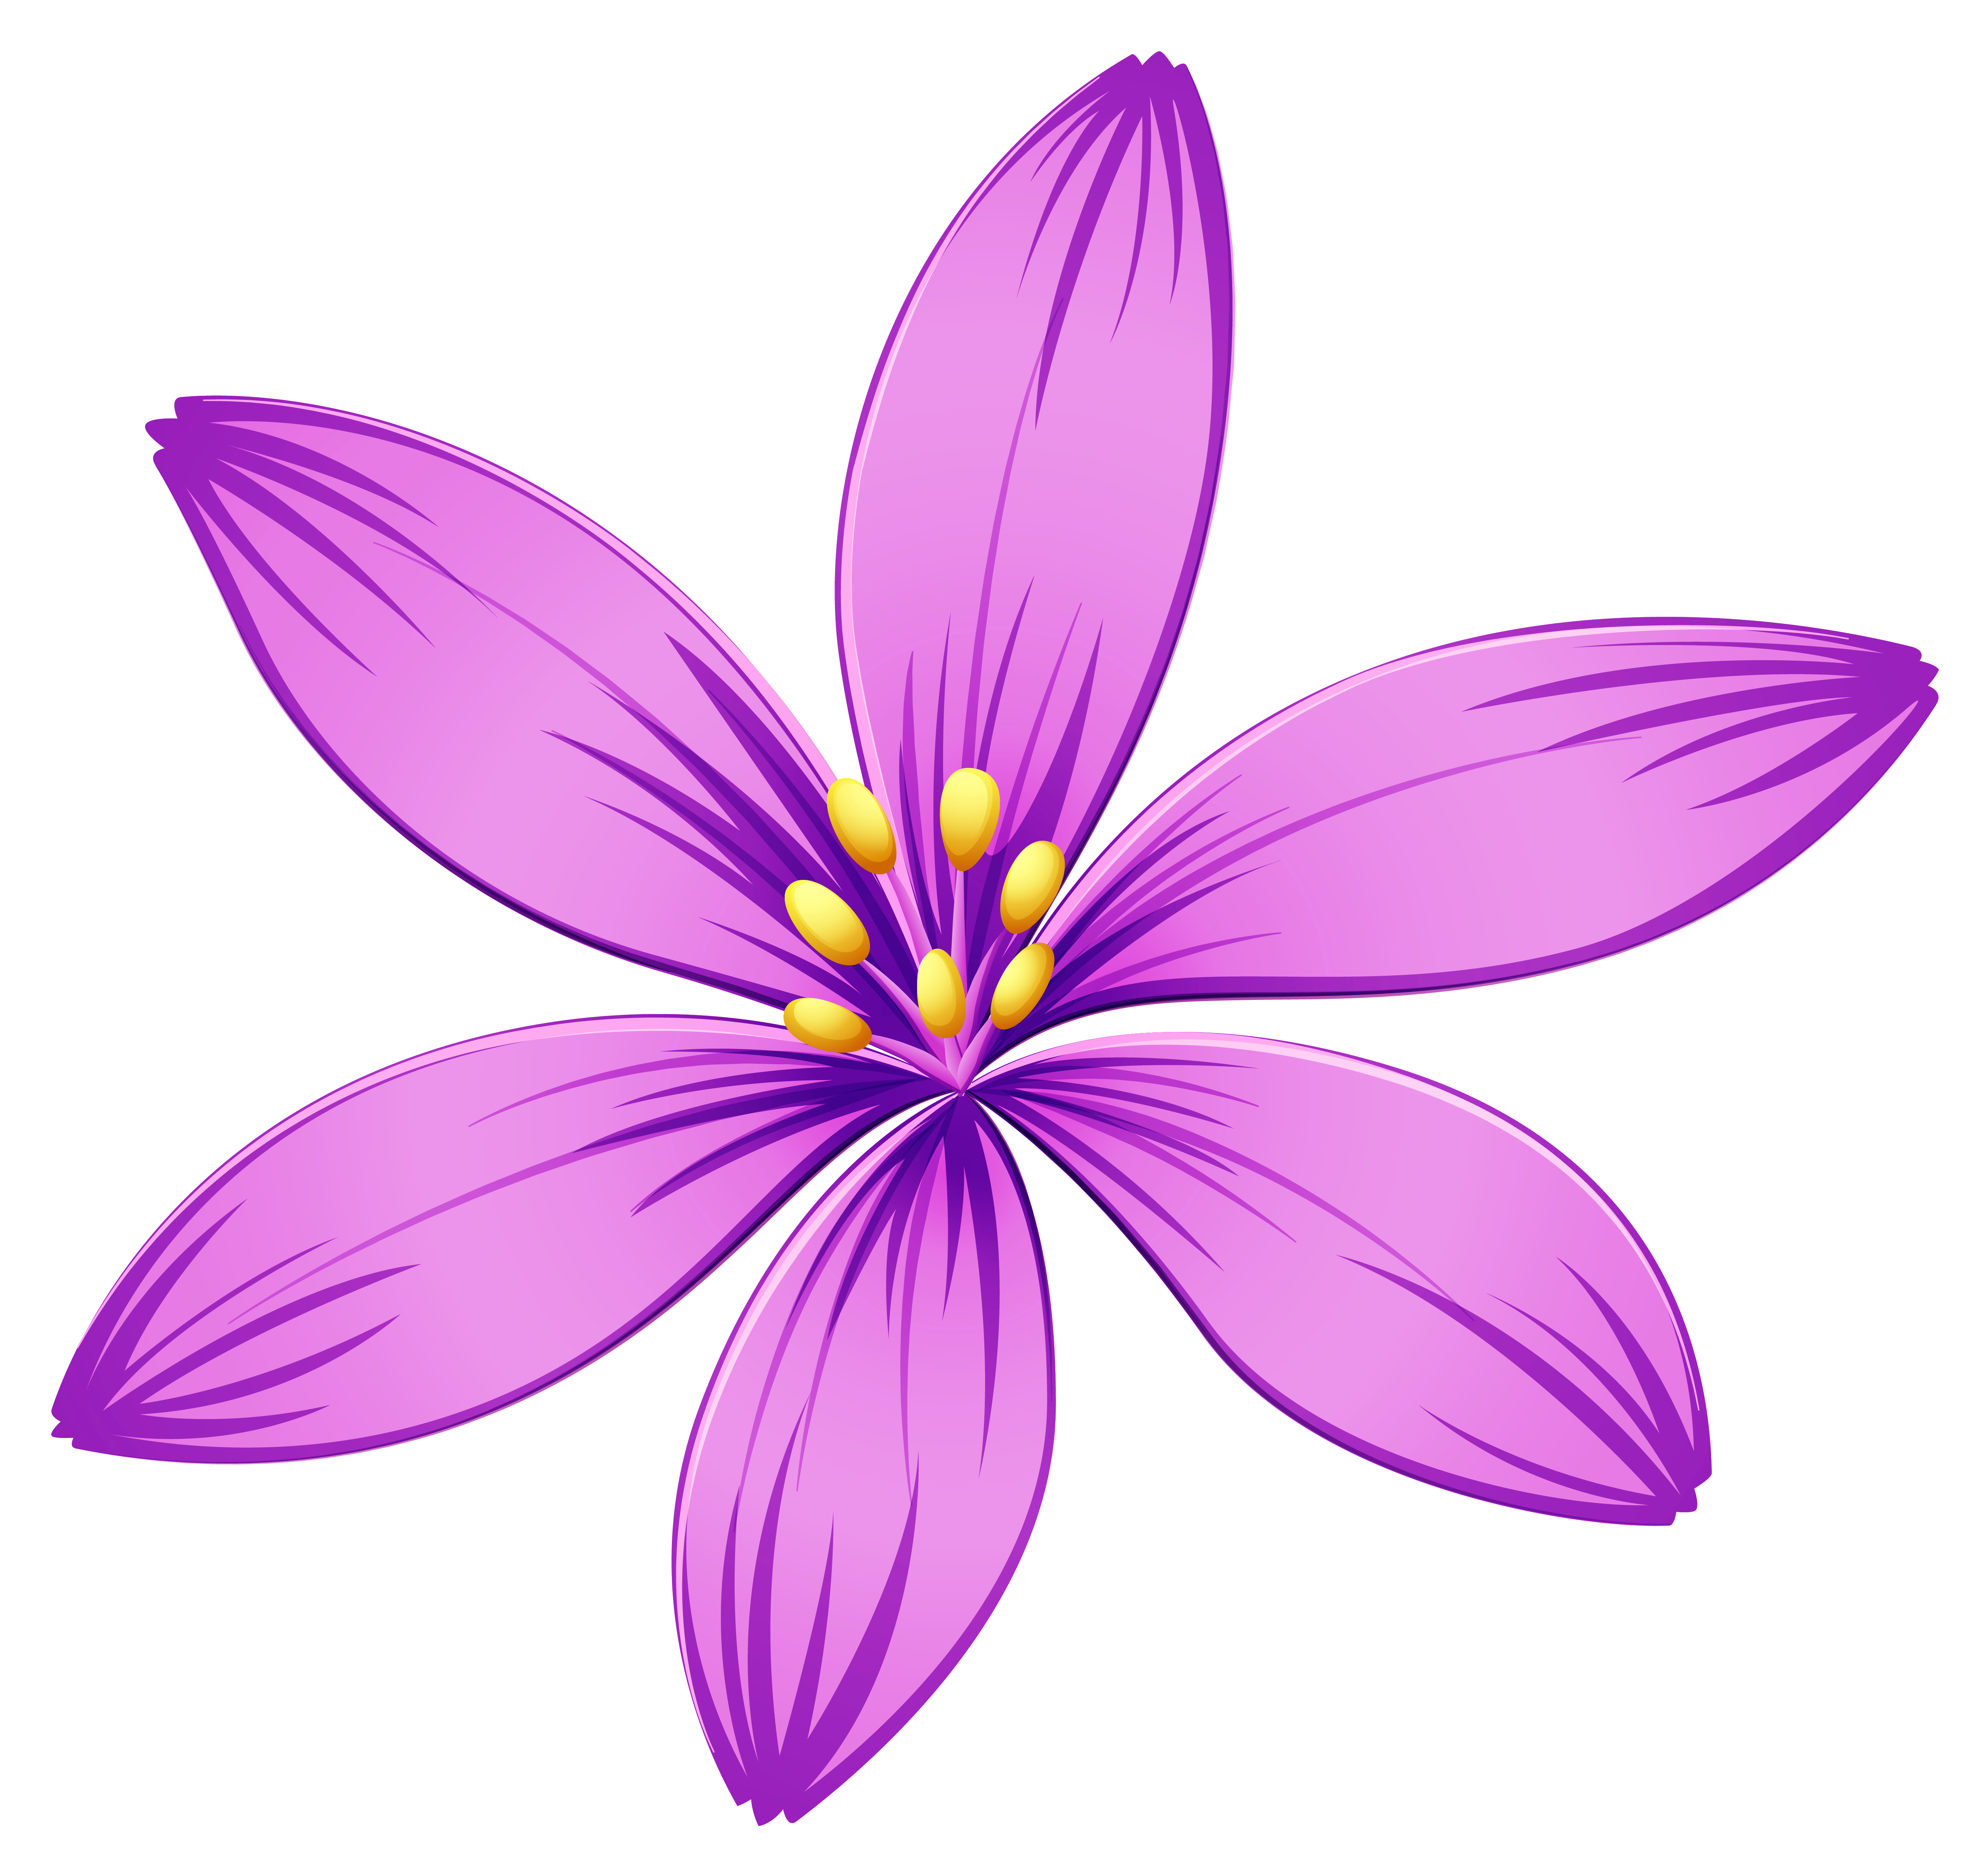 Image gallery yopriceville high. Purple flower png